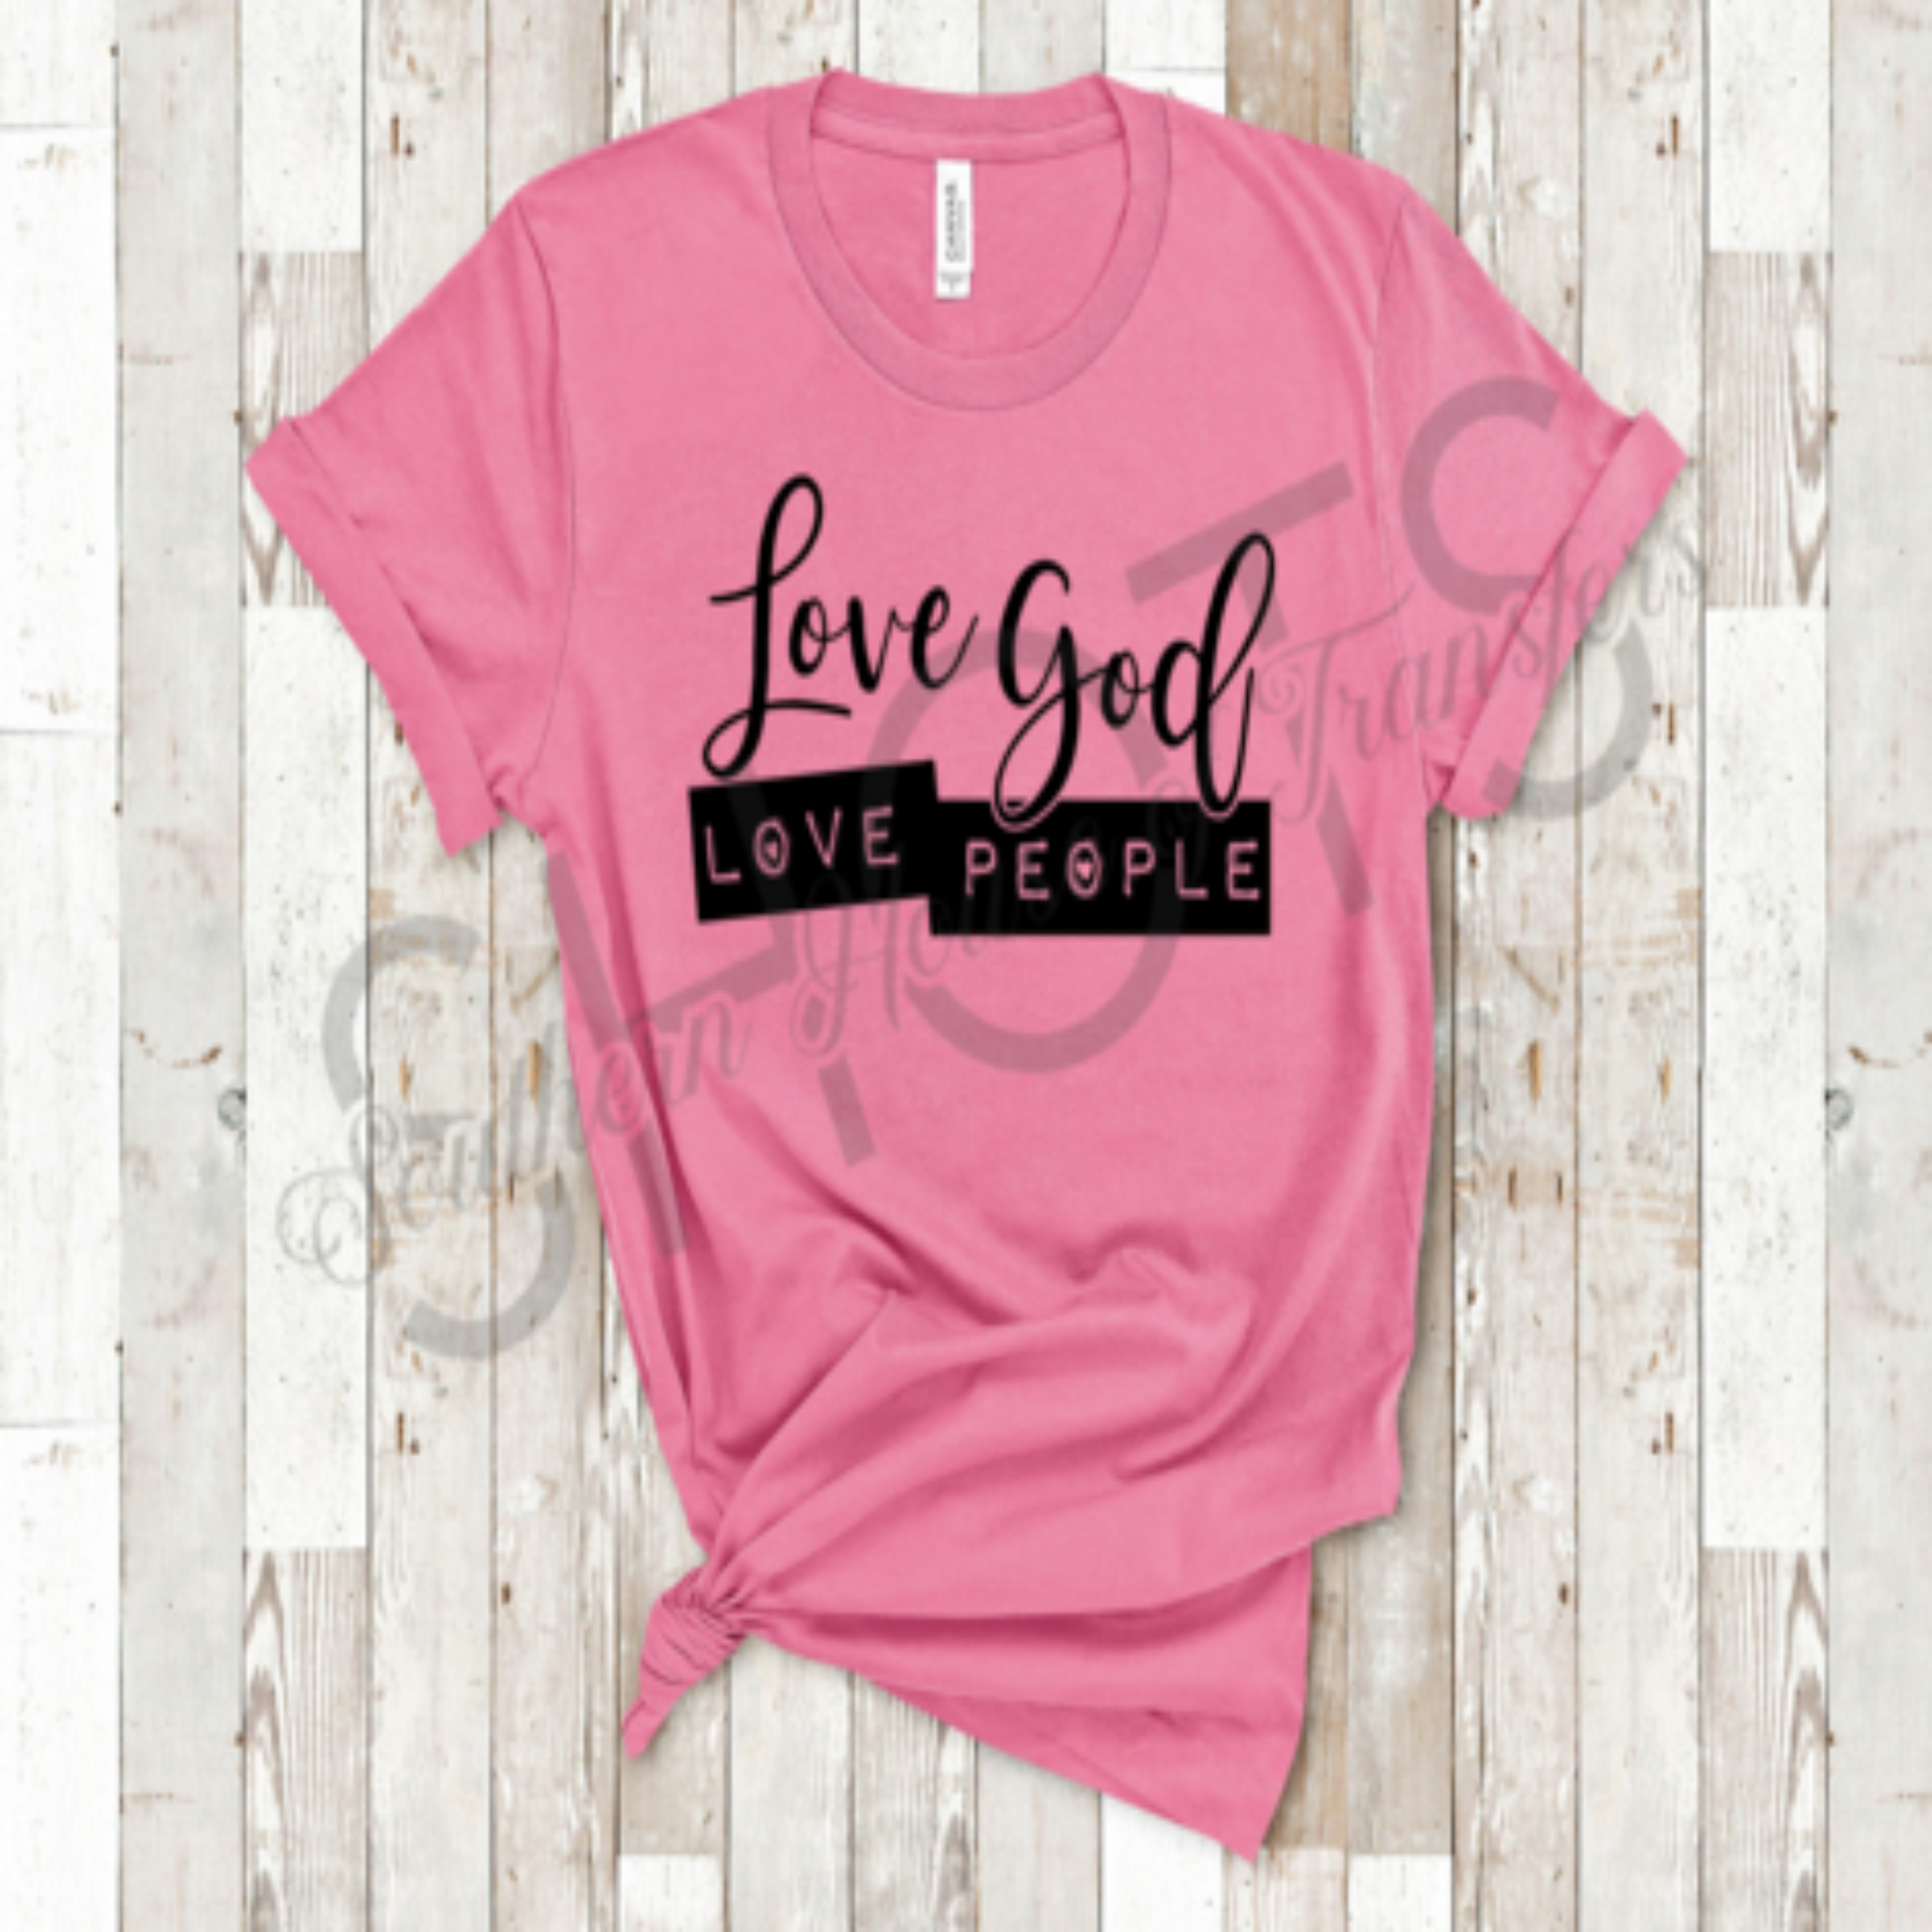 love_God_people specialty tee everyday wear casual tshirt comfortable shirt